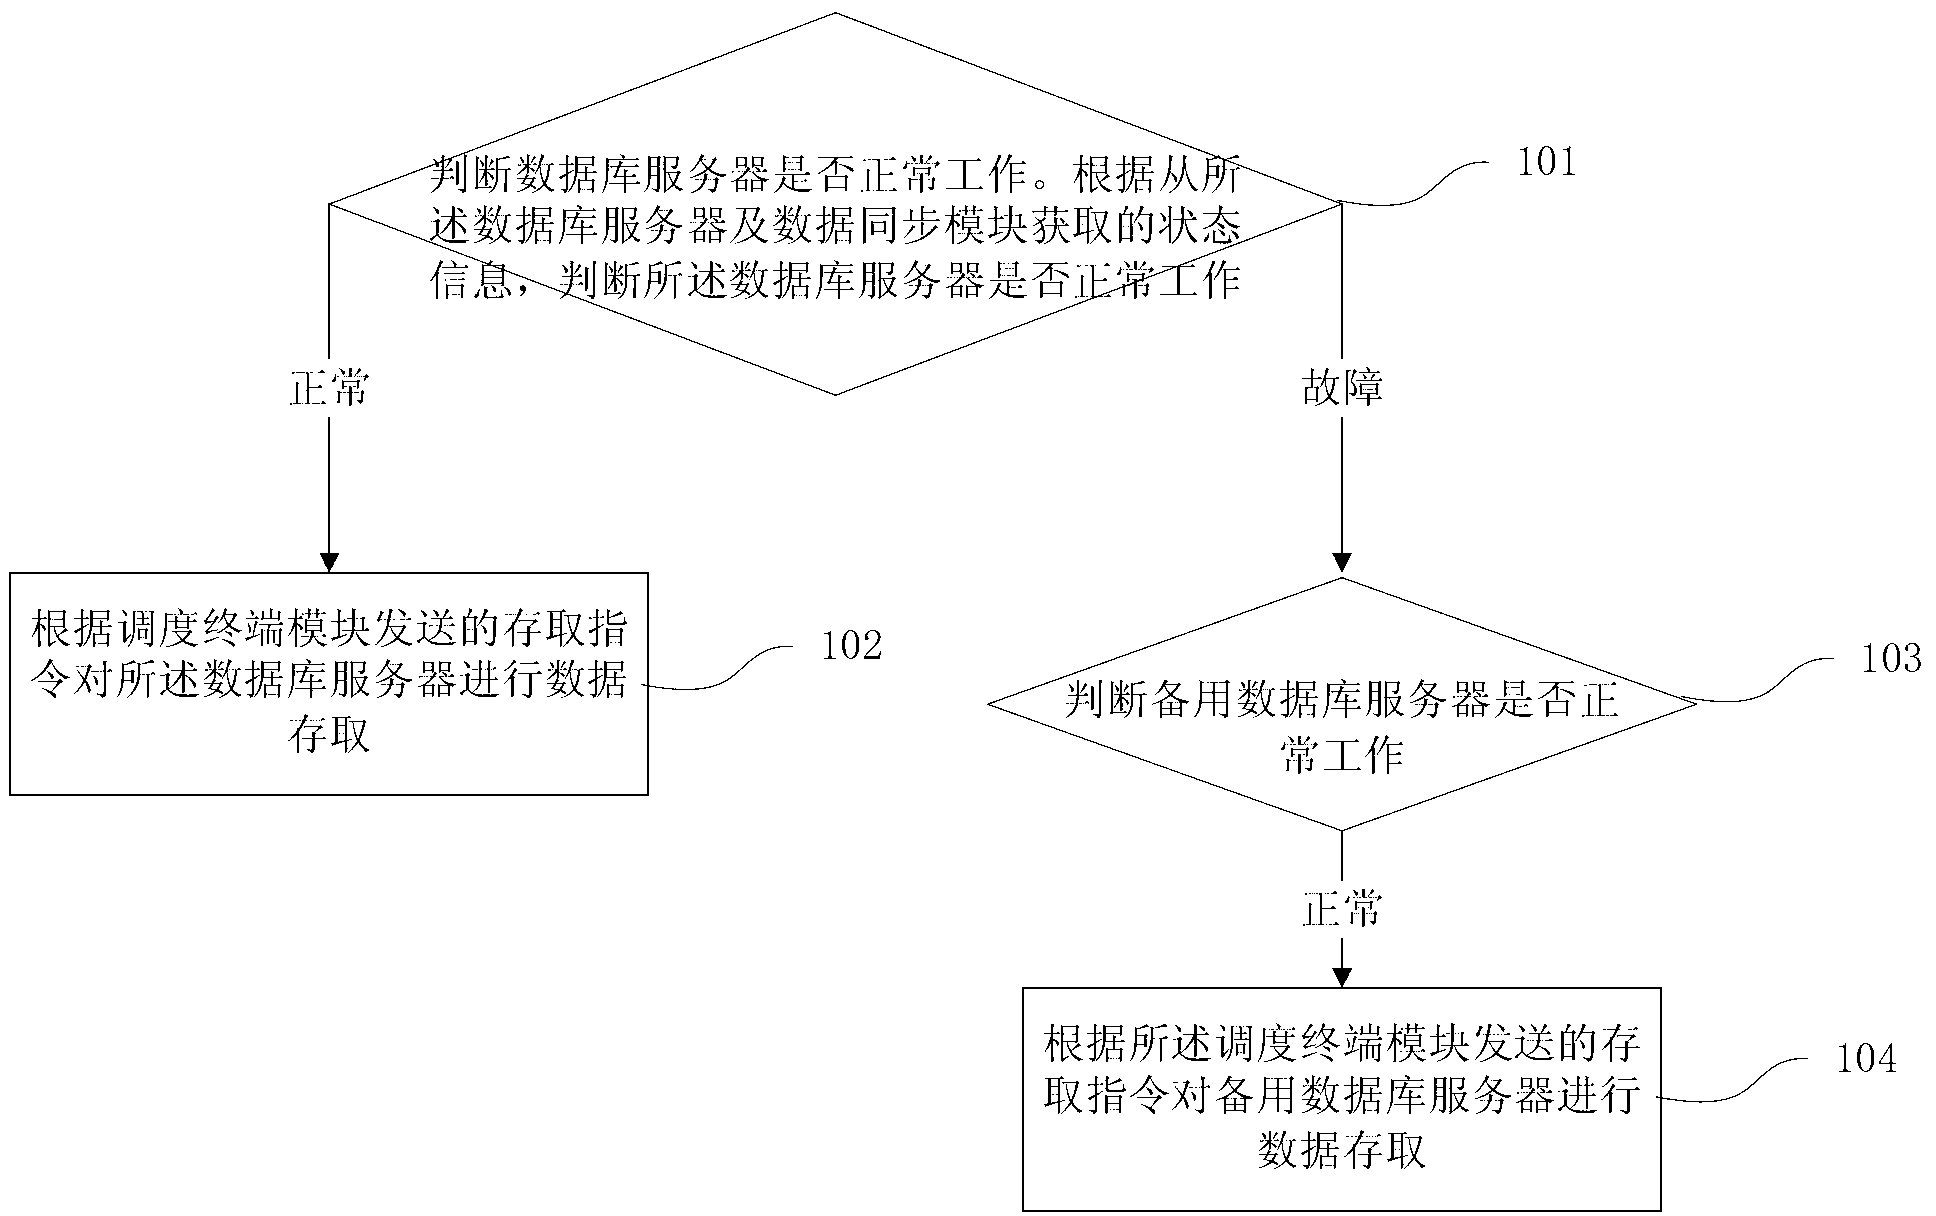 Control method and system for data access